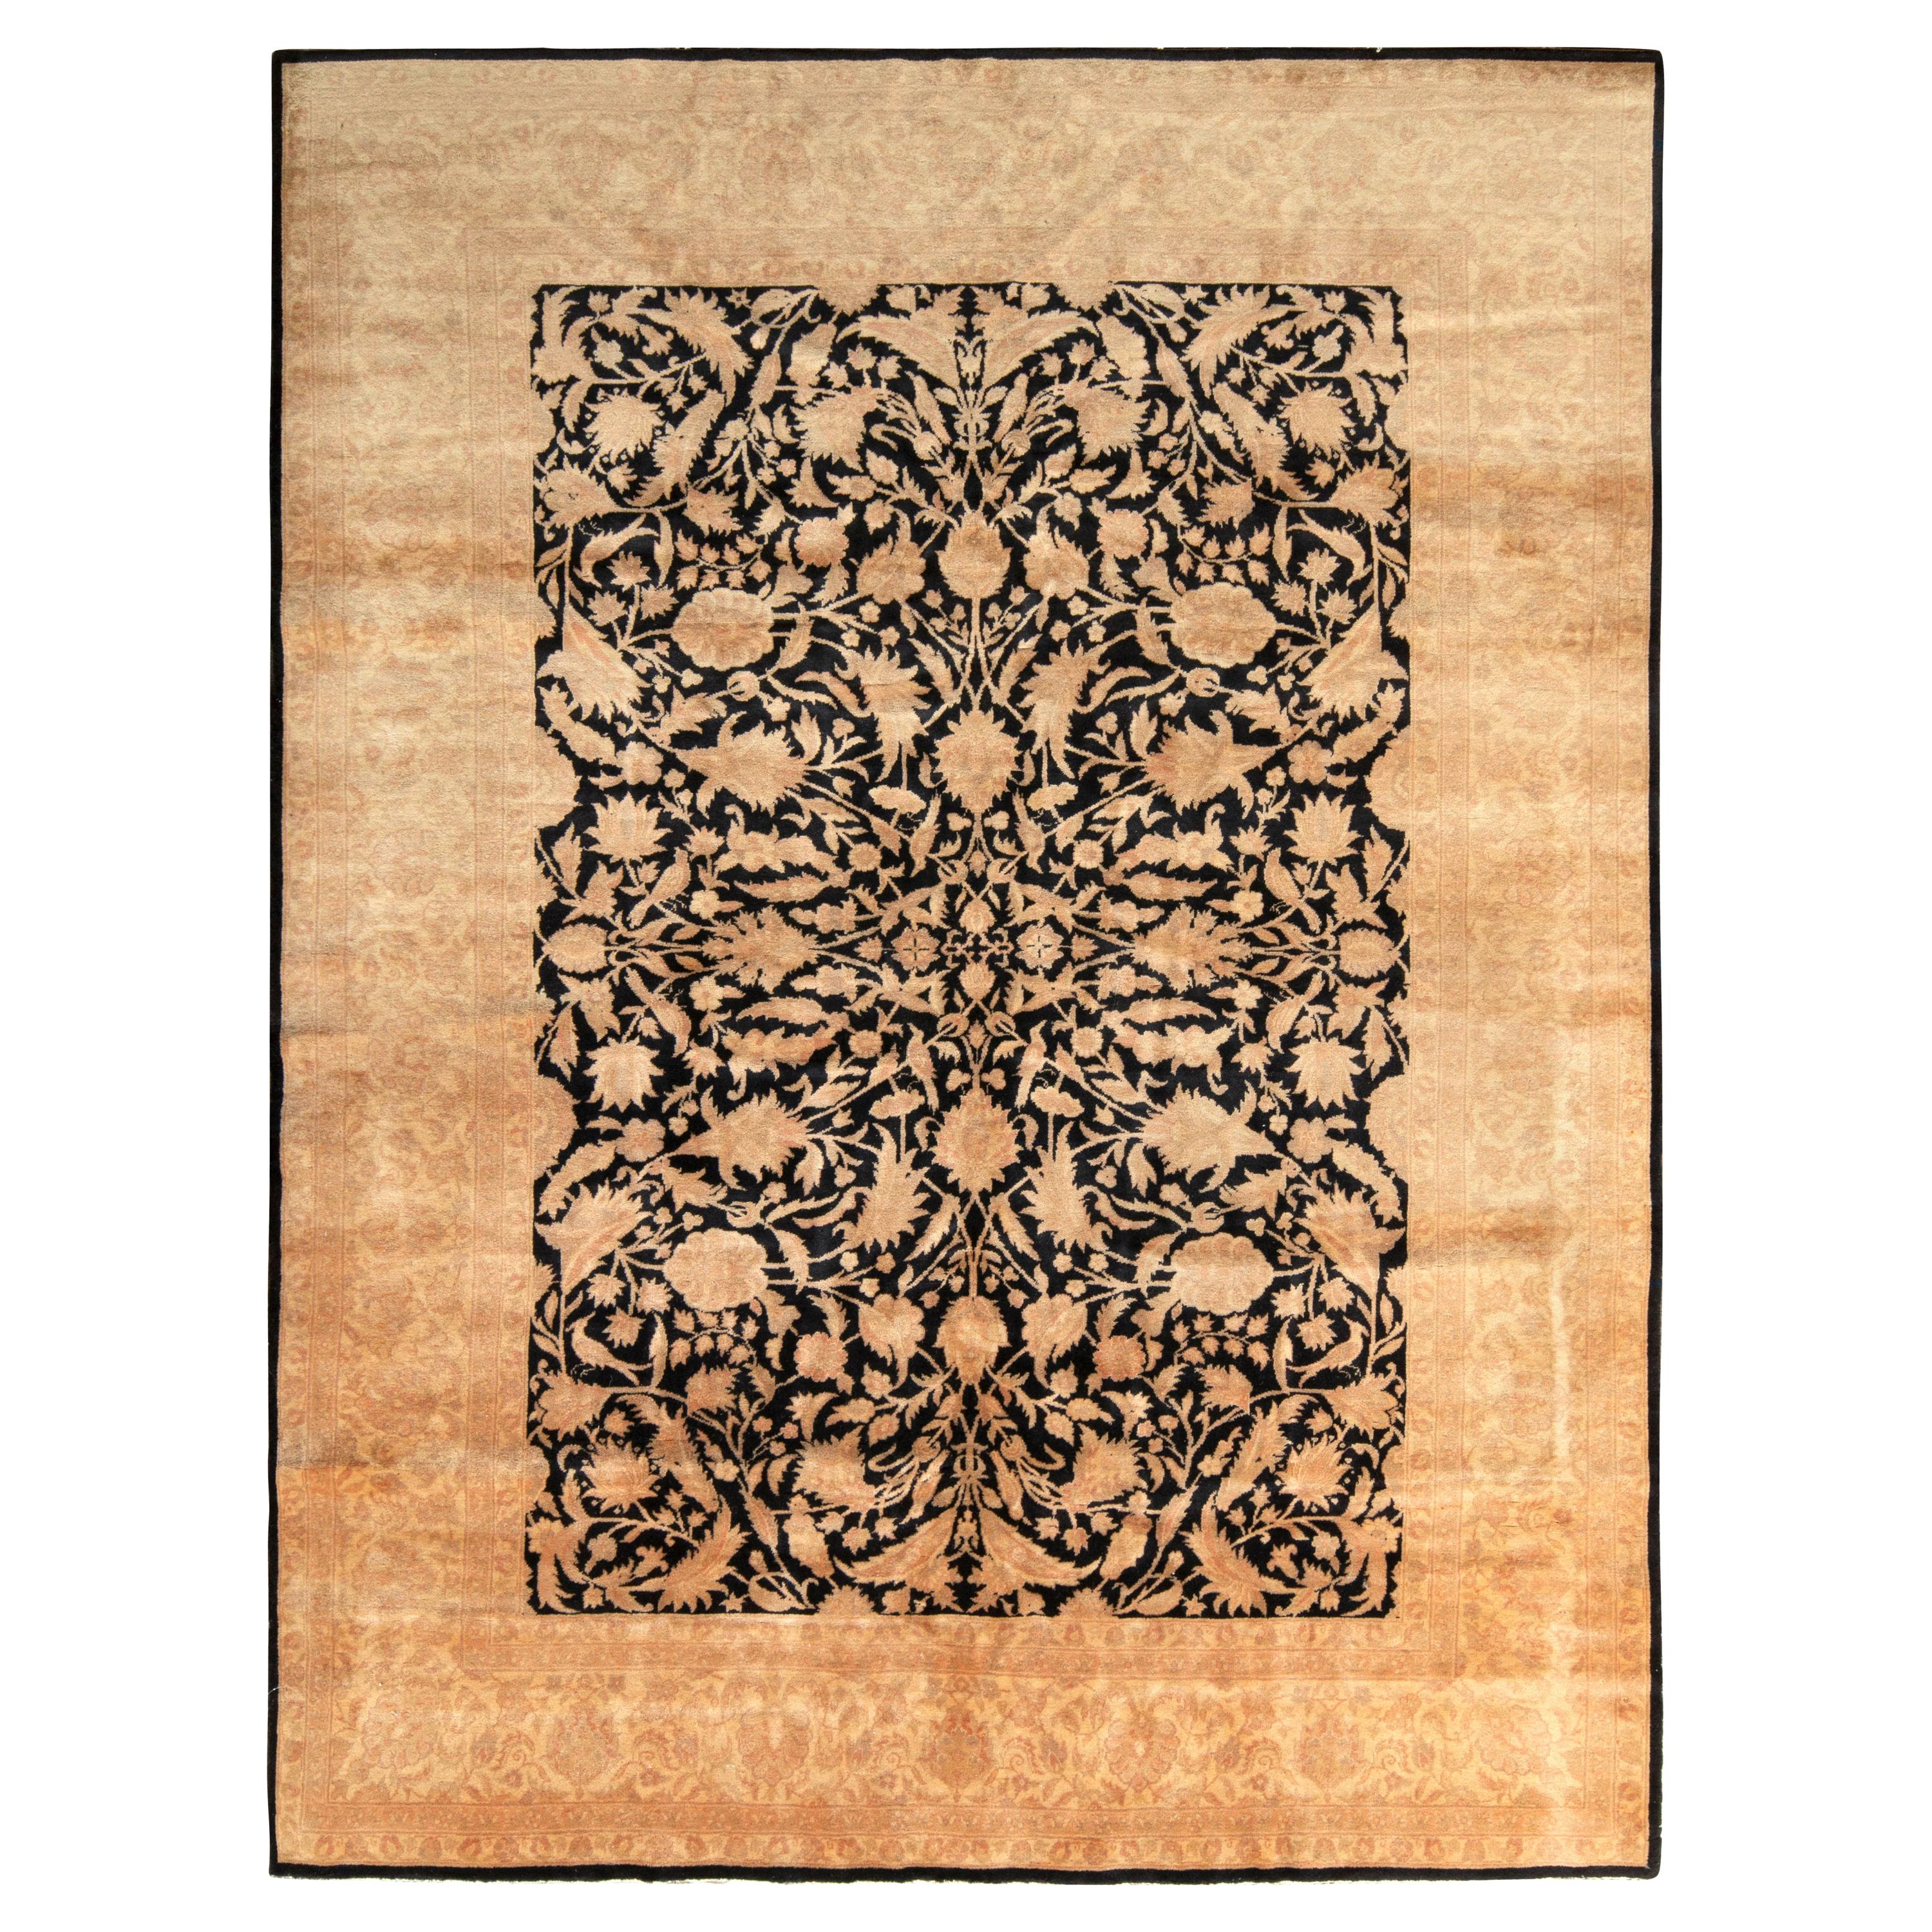 Rug & Kilim’s Contemporary Rug in Beige-Brown and Black Floral Pattern